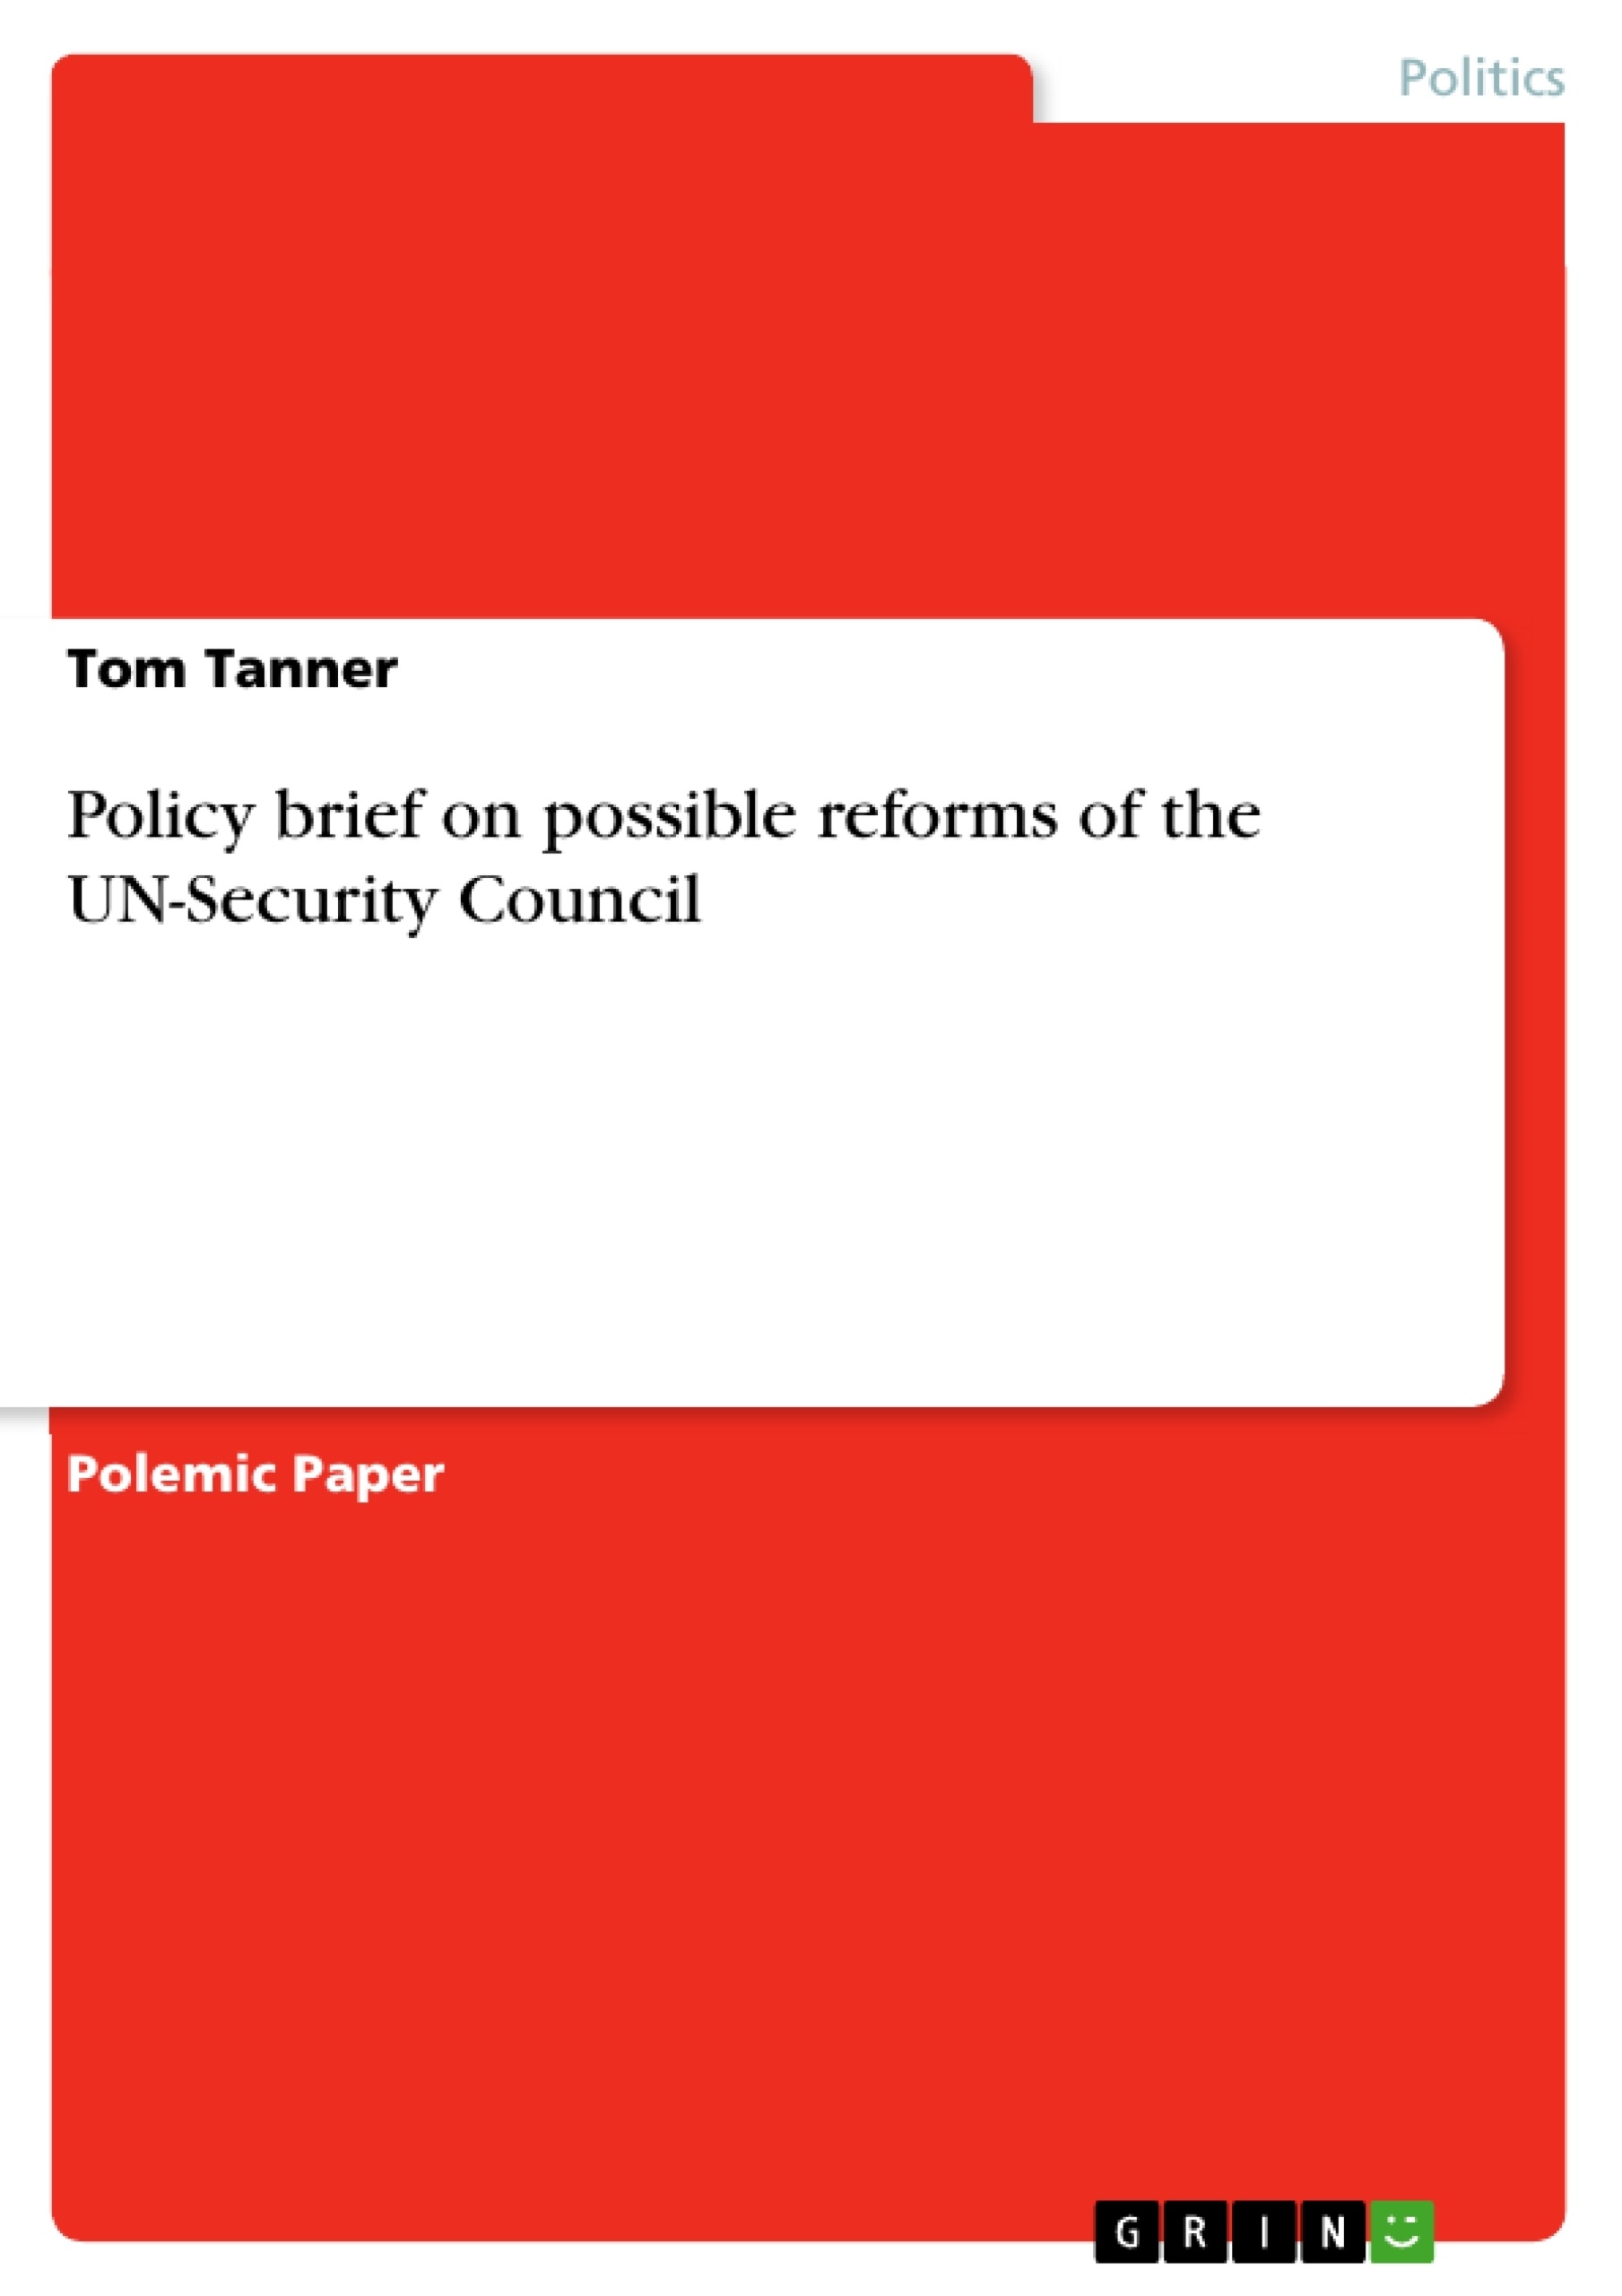 Title: Policy brief on possible reforms of the UN-Security Council